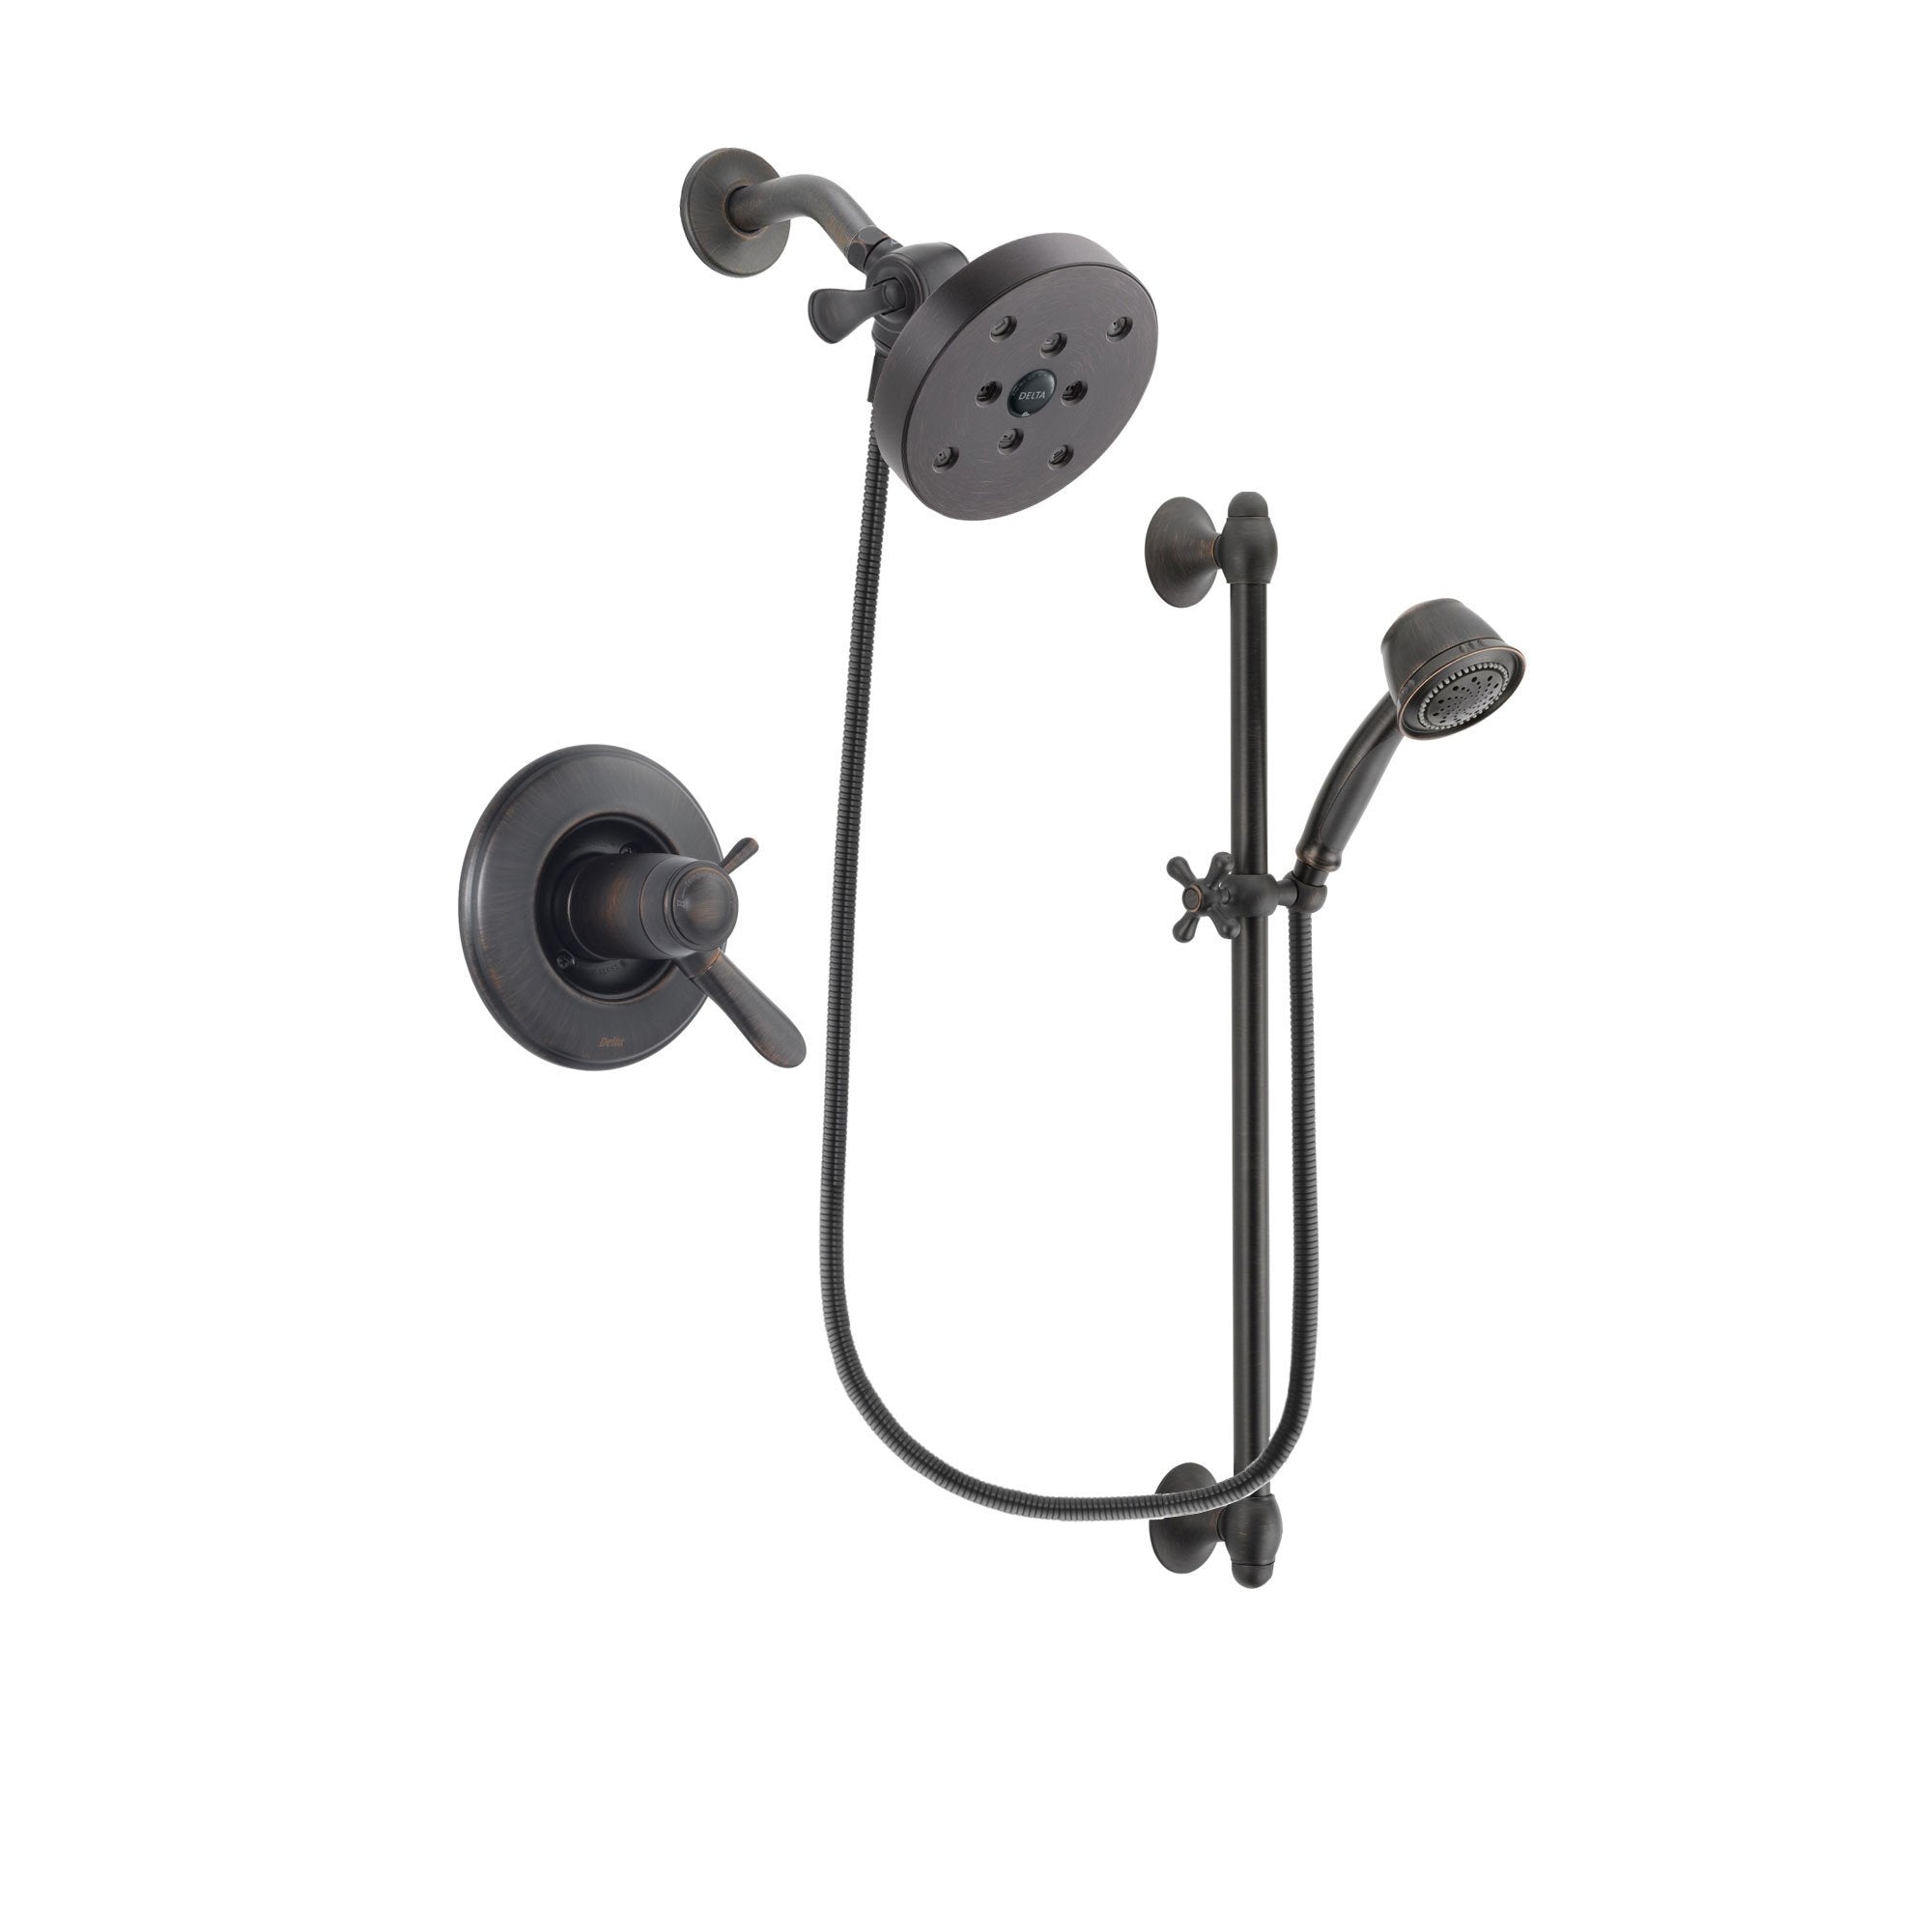 Delta Lahara Venetian Bronze Finish Thermostatic Shower Faucet System Package with 5-1/2 inch Showerhead and 5-Spray Personal Handshower with Slide Bar Includes Rough-in Valve DSP2592V